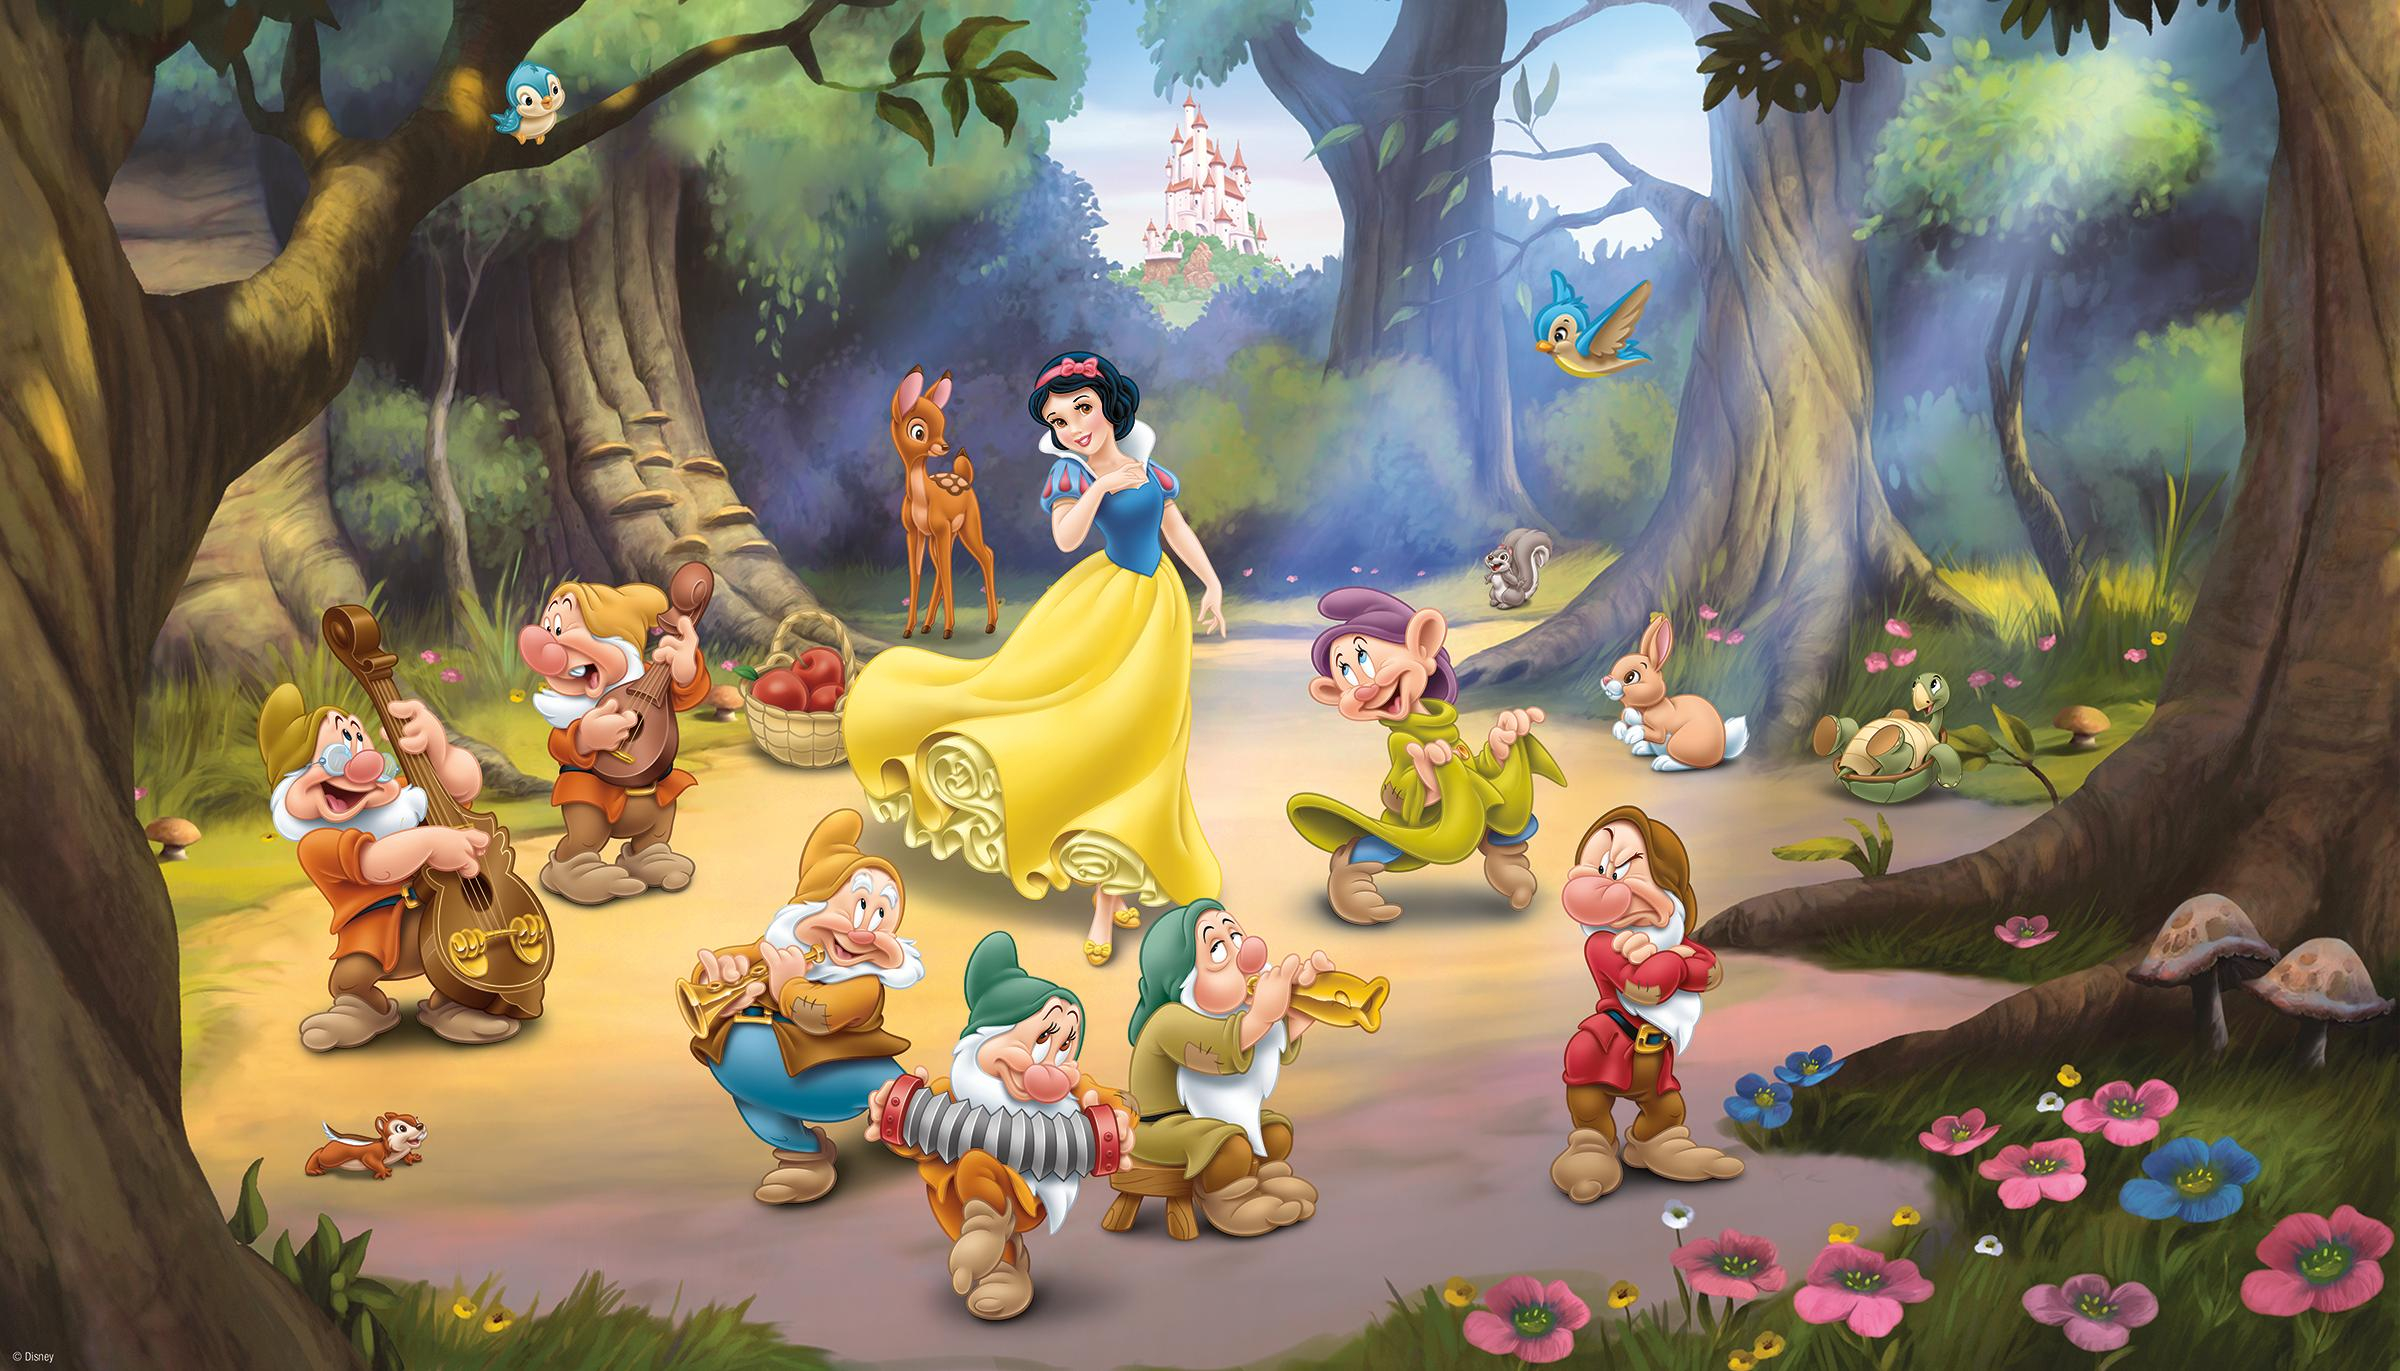 2400x1371 Disney Snow White and the Seven Dwarfs Mural |Mid-size Wall Murals |The Mural Store